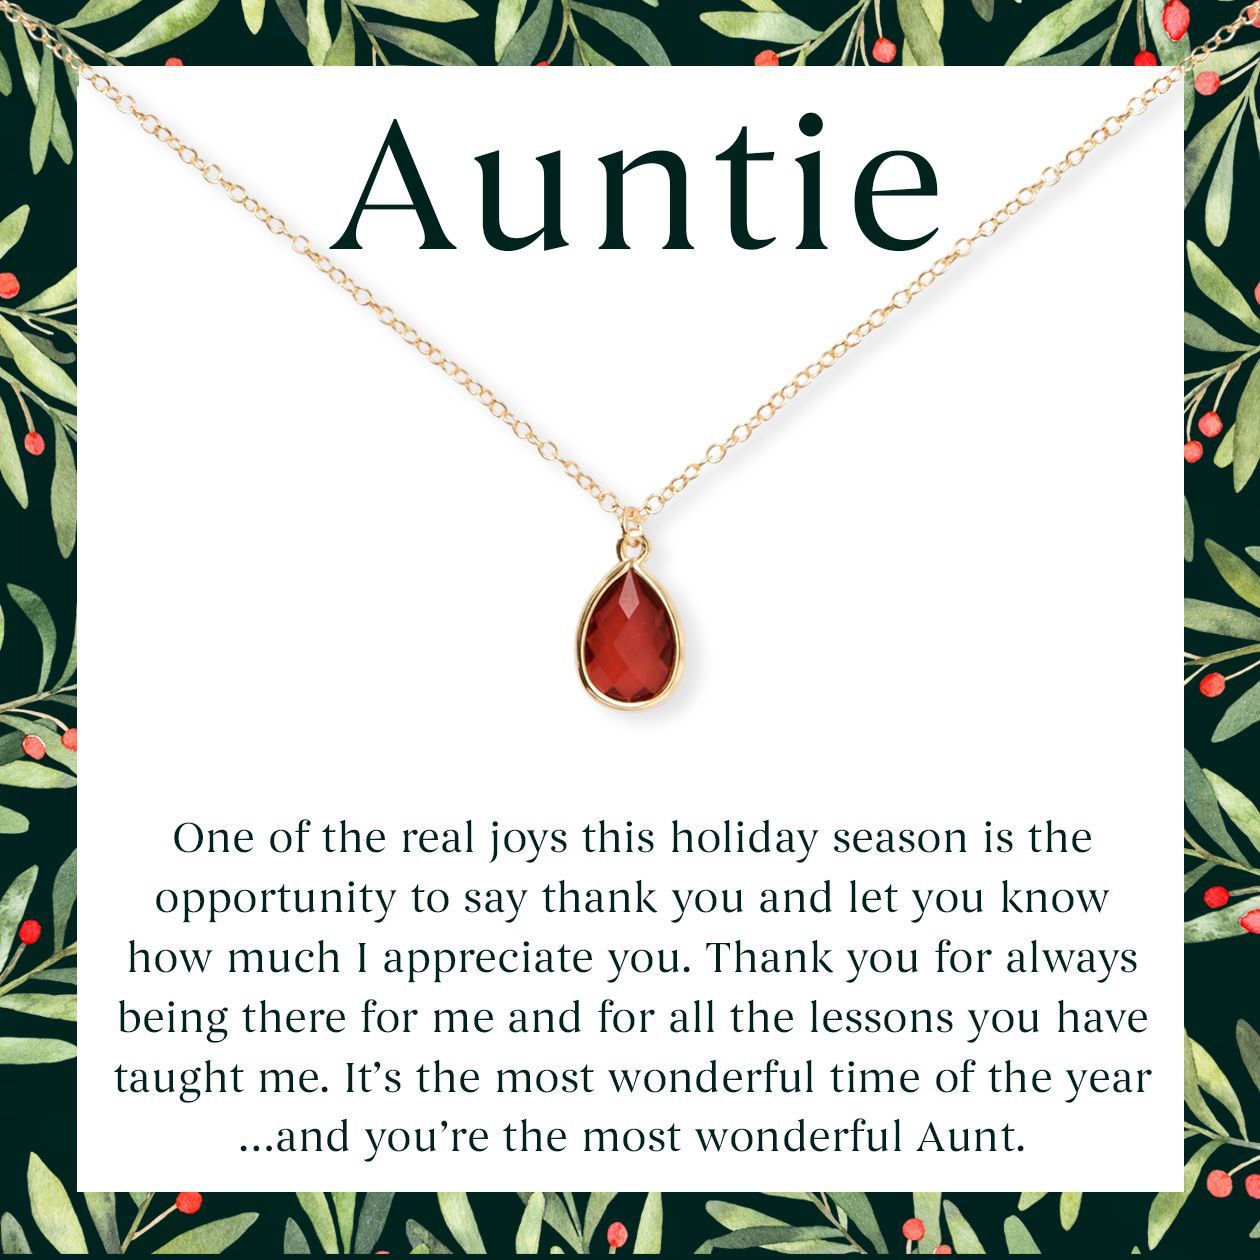 Christmas Gift for Aunt: Present, Necklace, Jewelry, Xmas Gift, Holiday Gift Idea, Auntie, Aunt Gift -   diy Presents for aunt